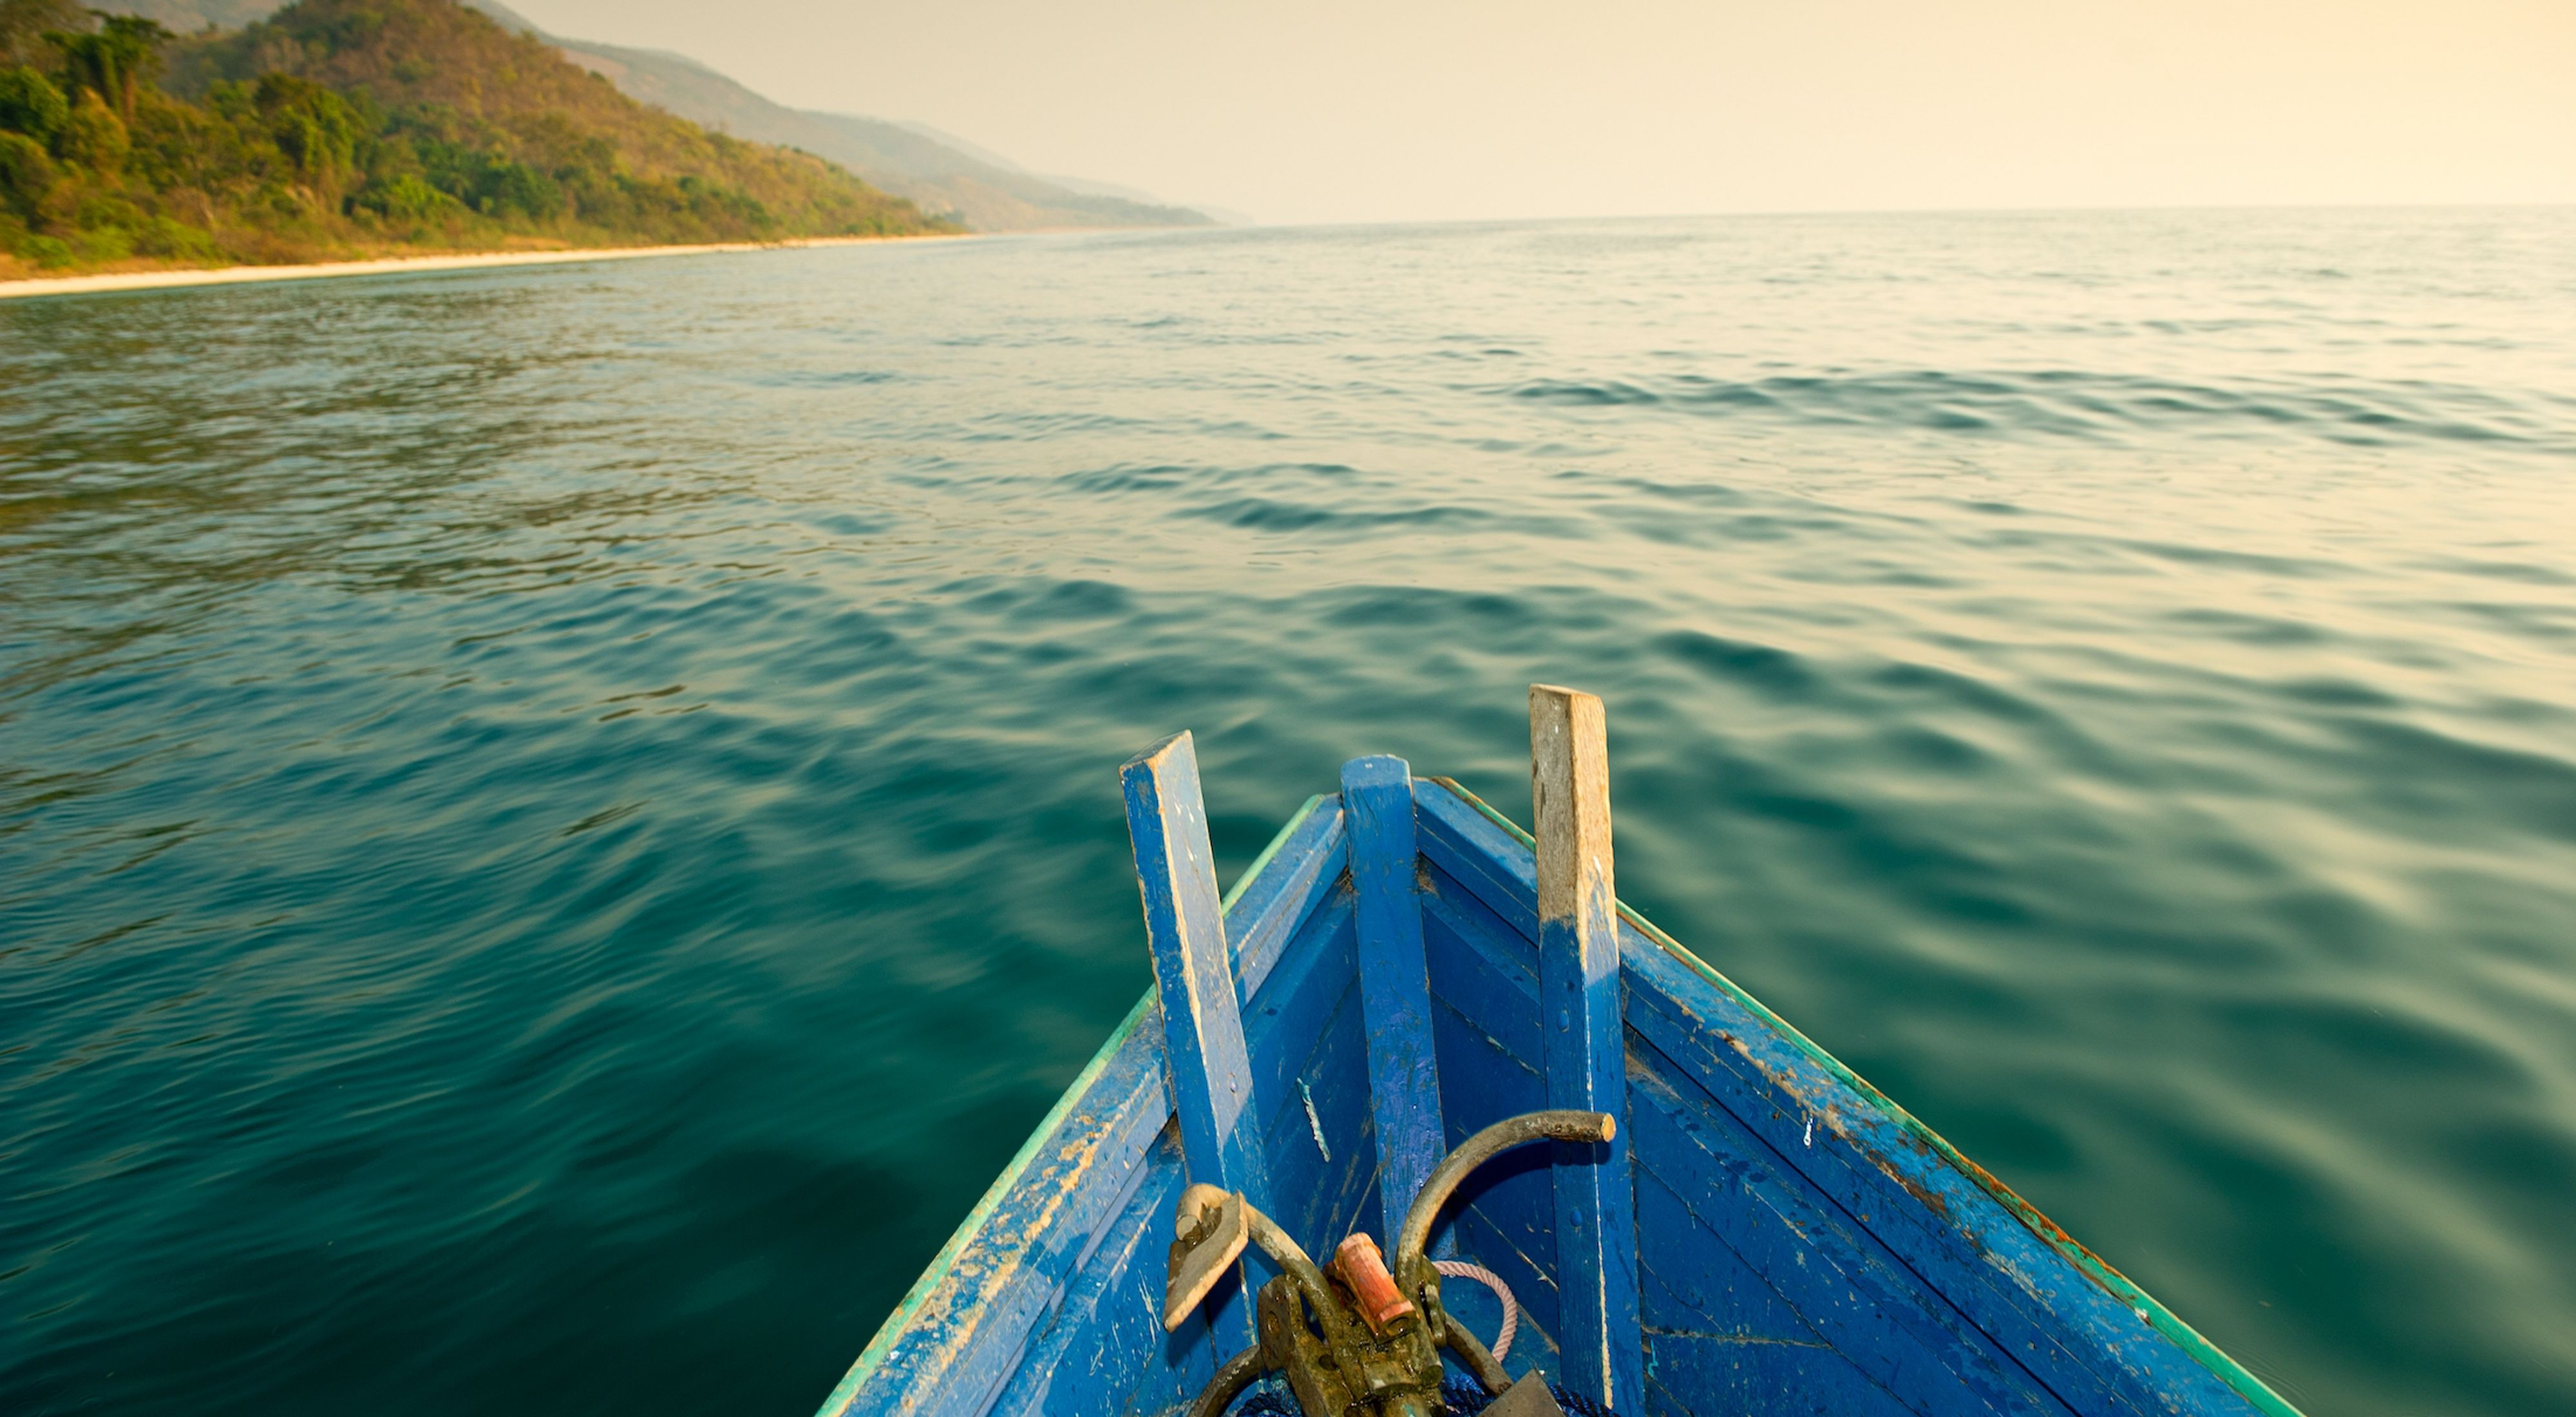 The front of a small, blue boat over the waters of Lake Tanganyika.